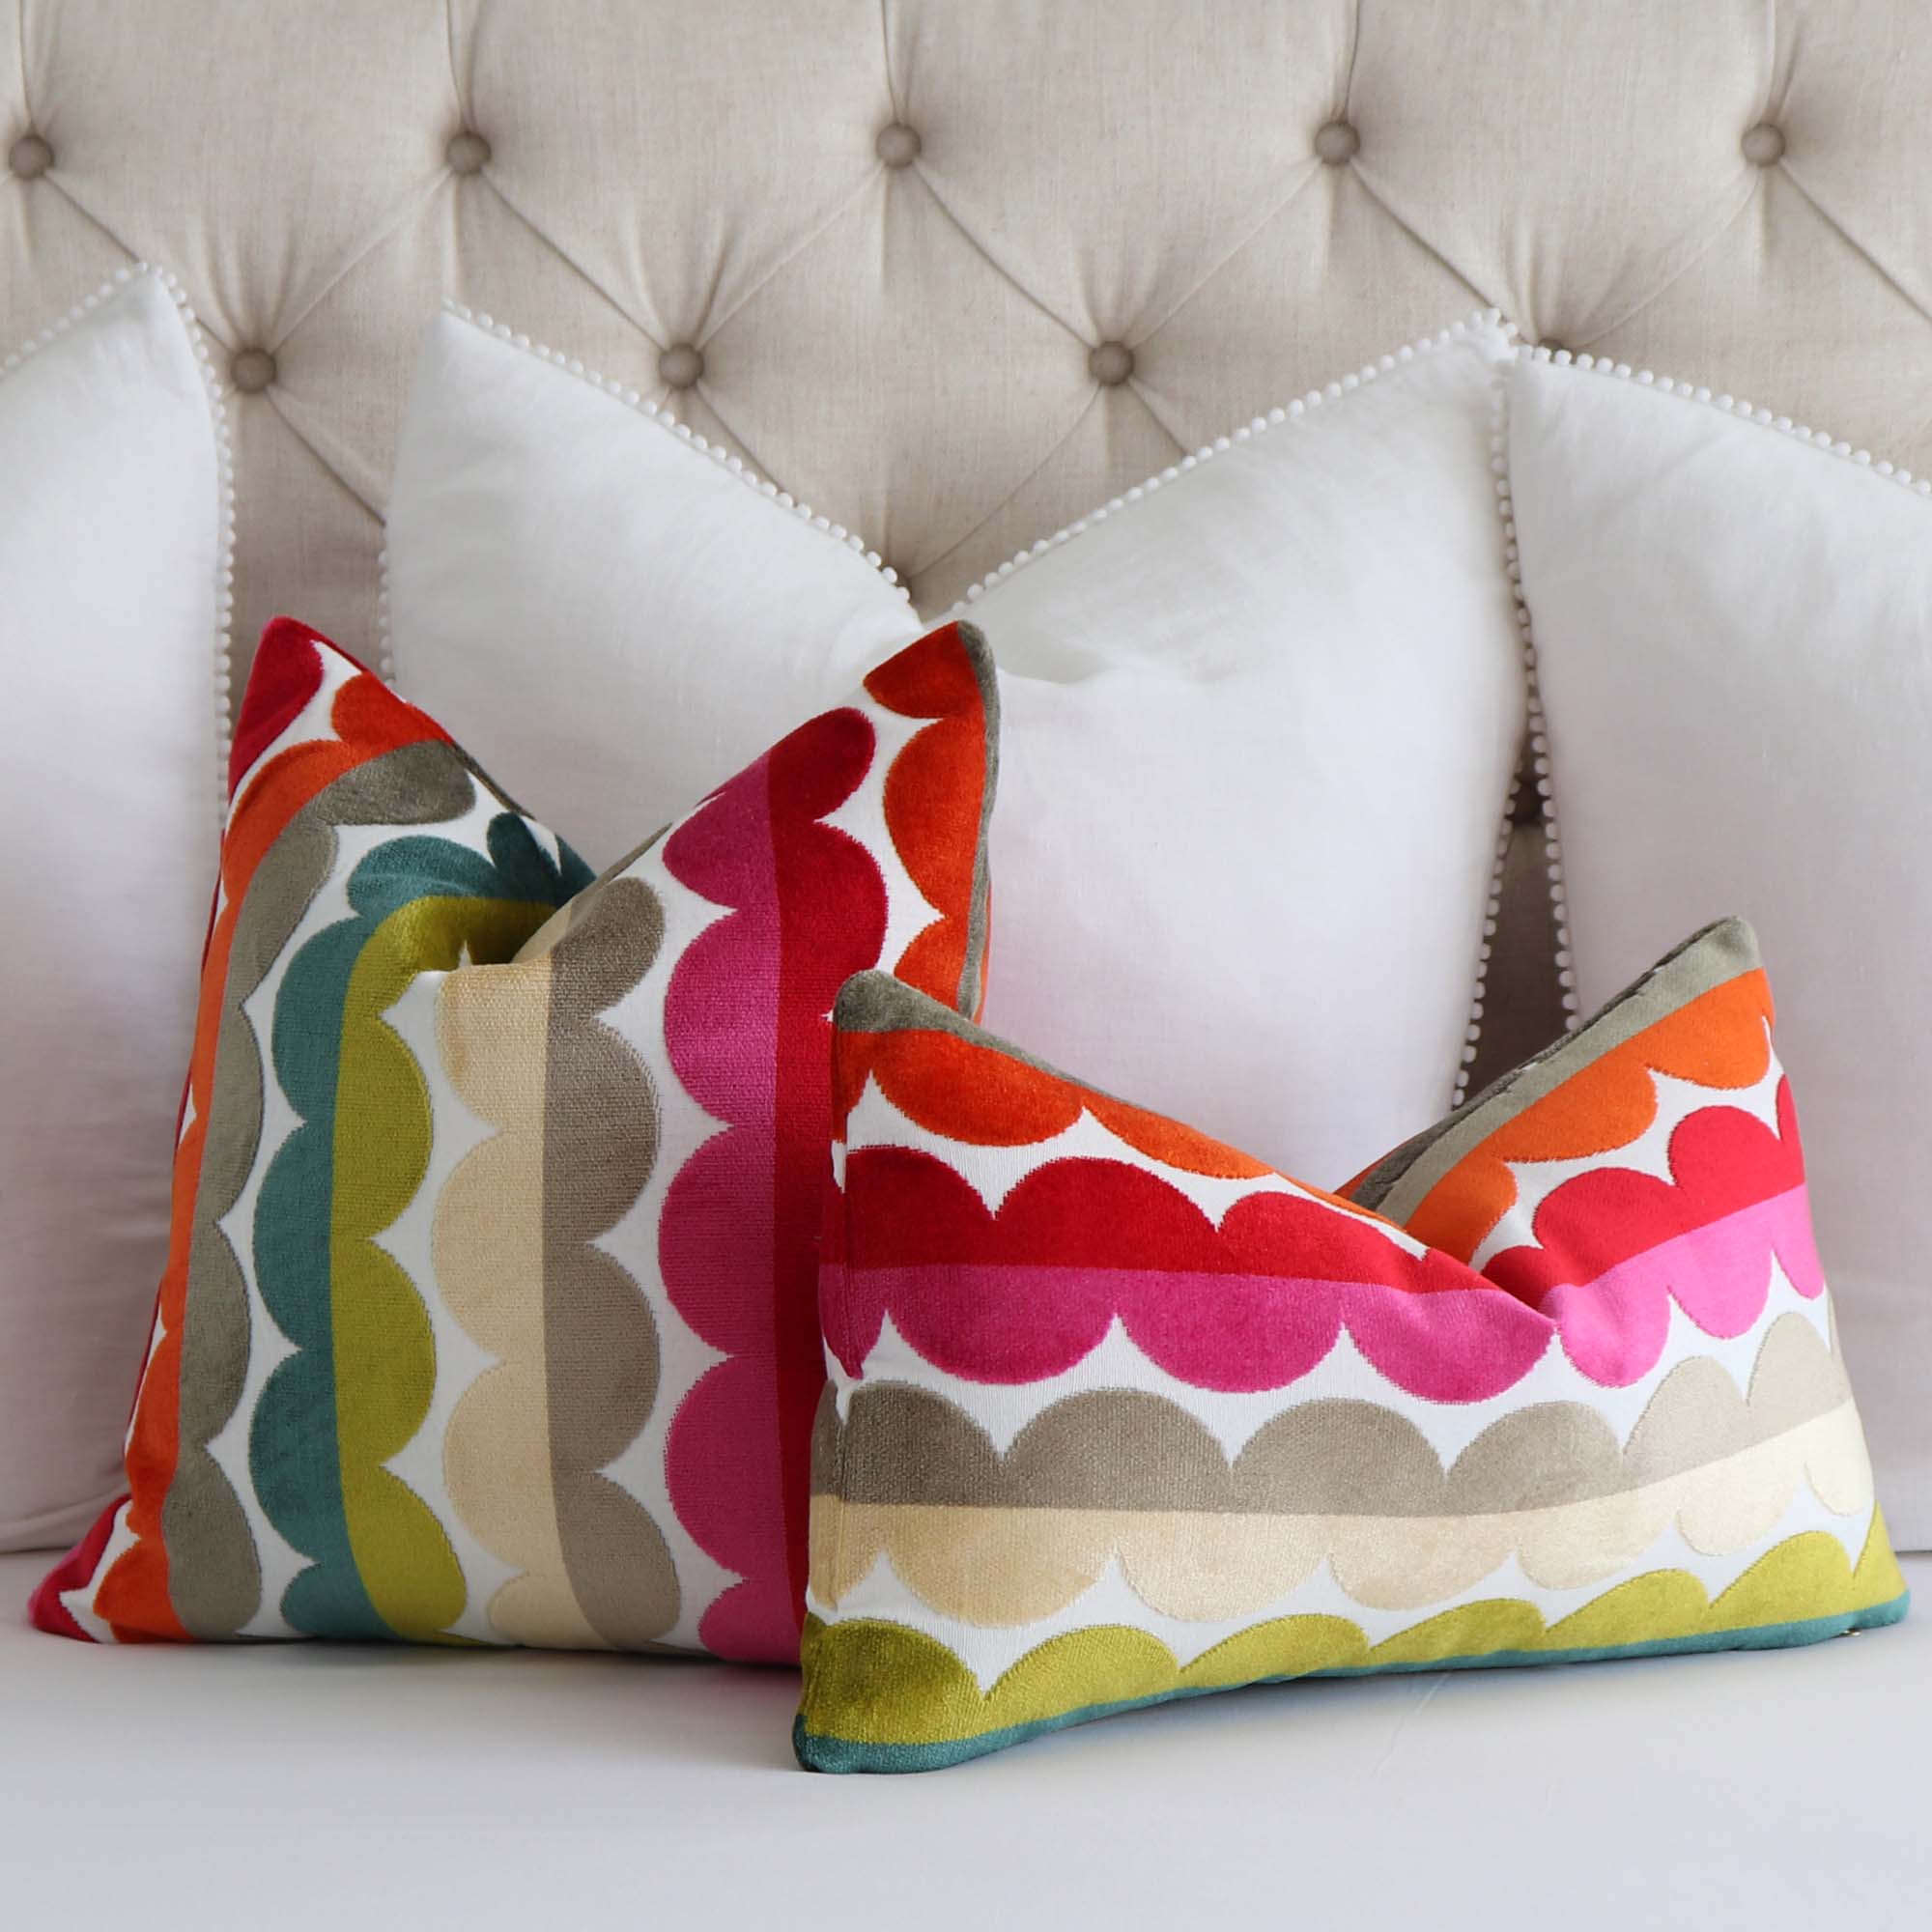 Luxury Pillow Covers - Luxury Cushion Covers